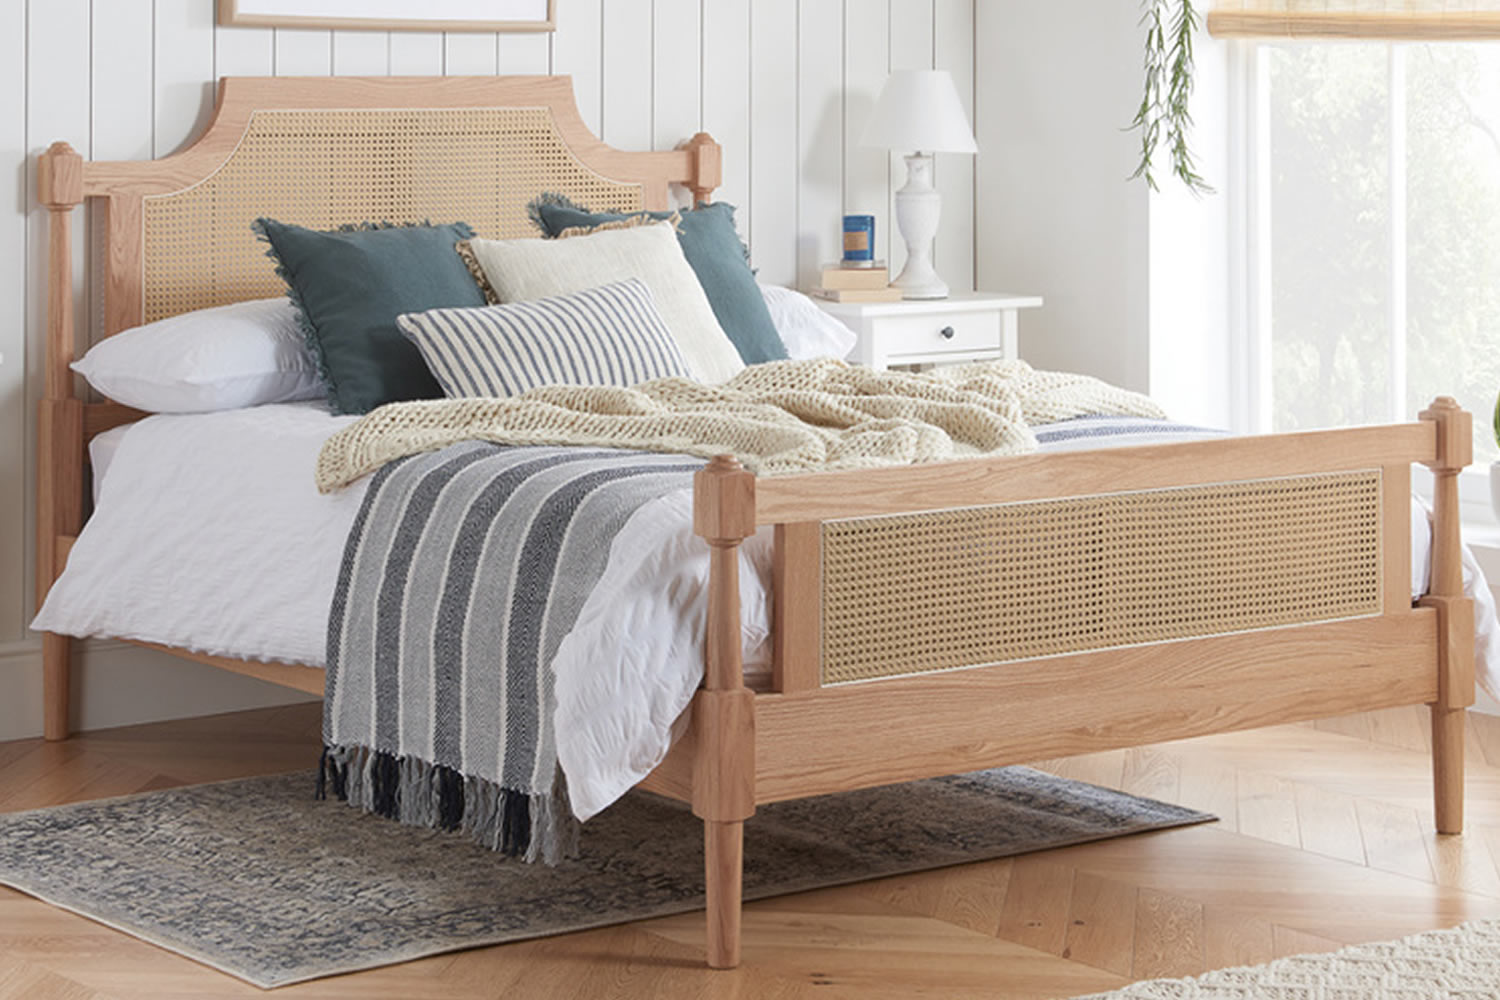 View Geneva 46 Double Wooden Bed Frame Crafted From Solid Oak Rattan Headboard High Foot End Sturdy Legs Sprung Slatted Base information